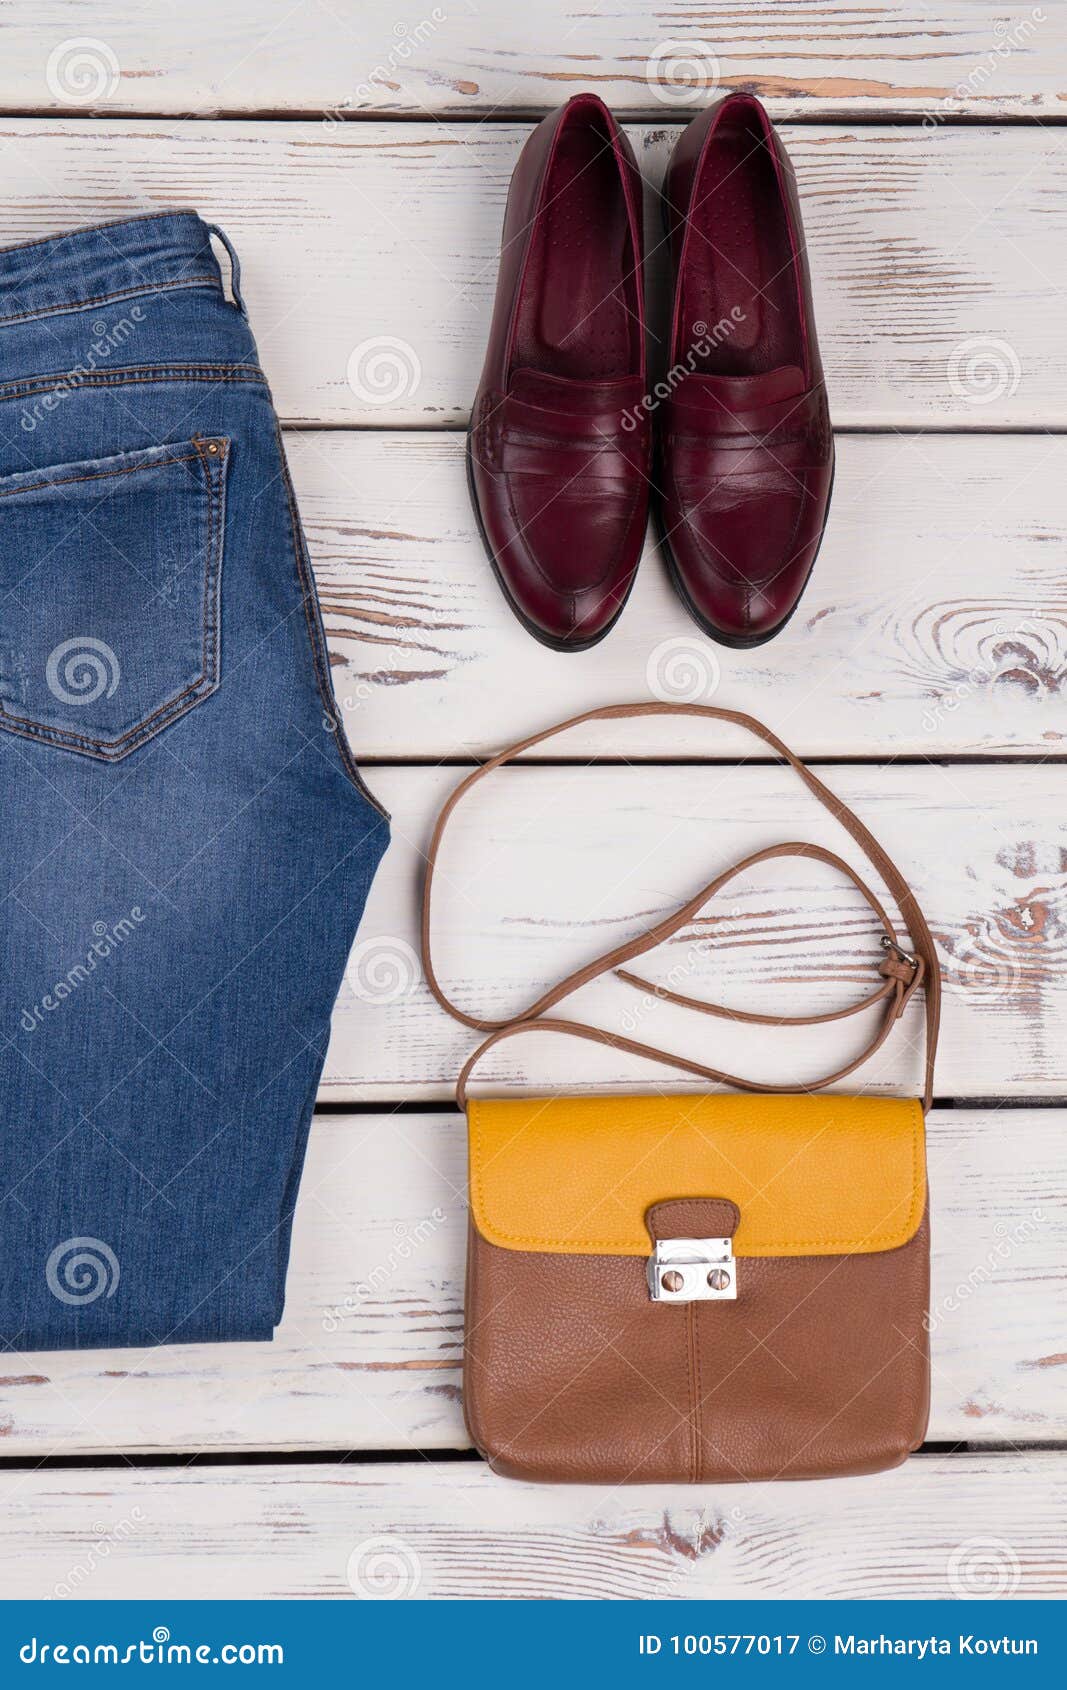 Leather Shoes and Shoulder Bag Stock Image - Image of shop, leather ...